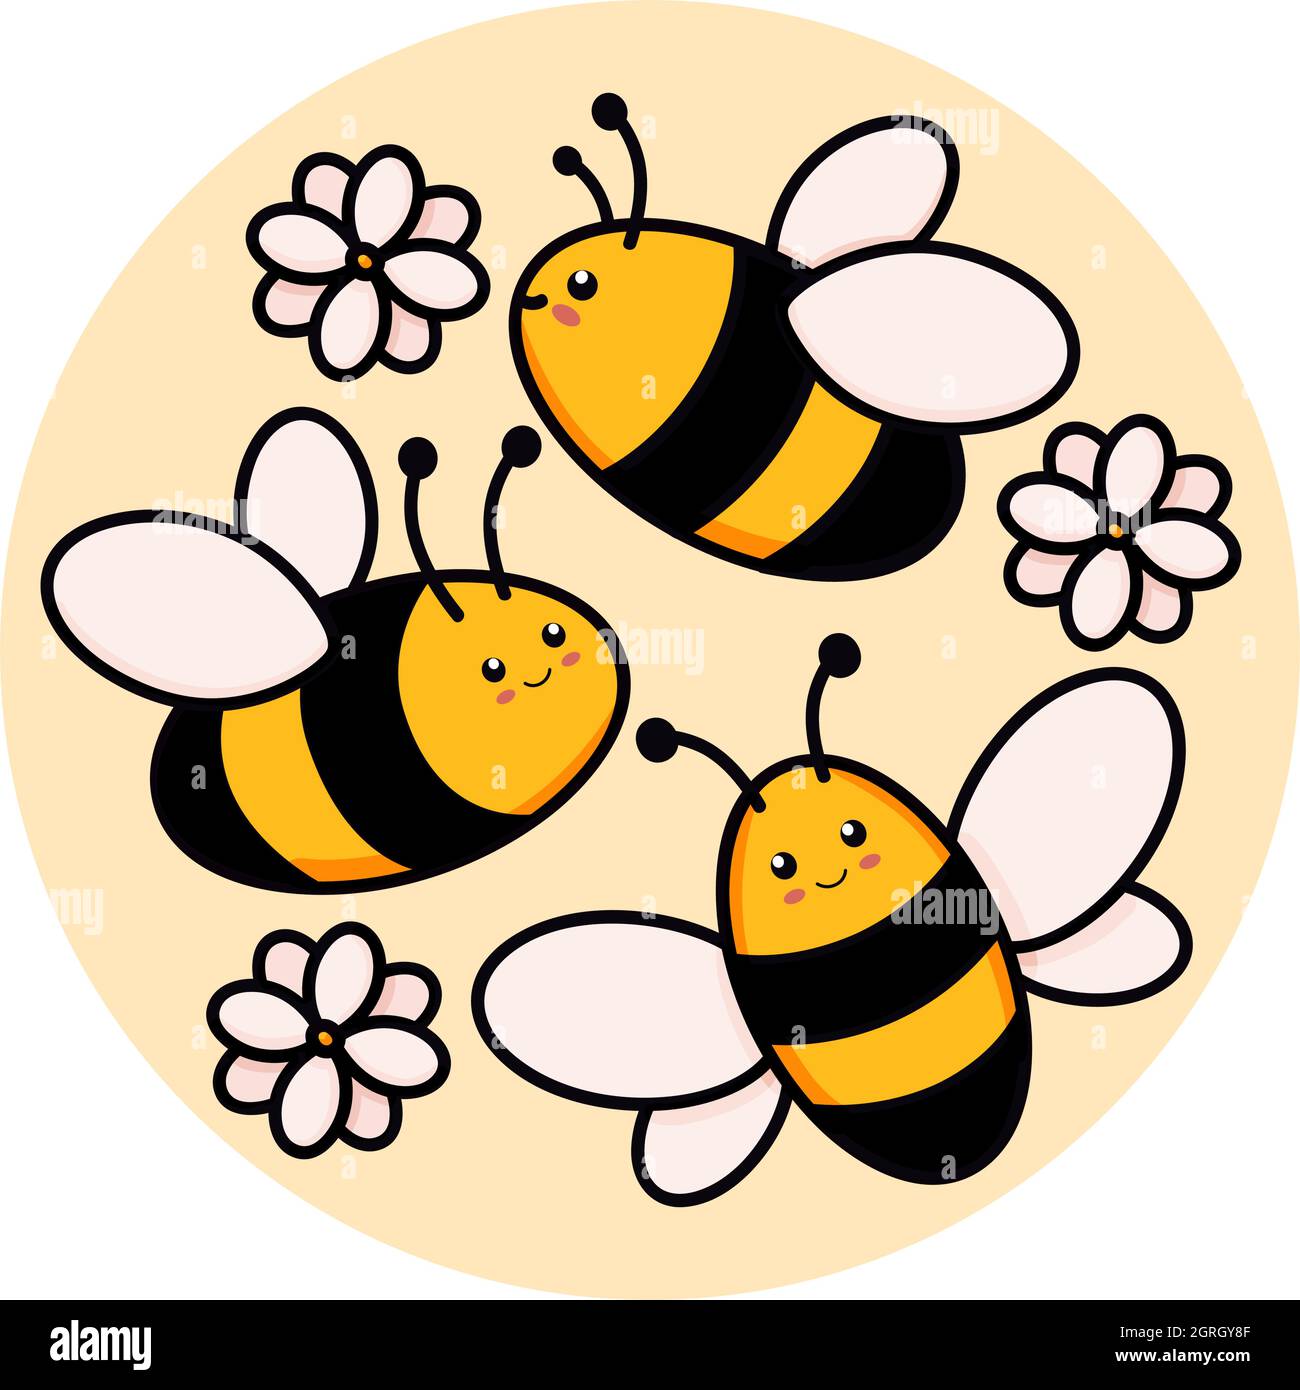 Cute set of bees in a round frame vector illustration in doodle style.  Colorful collection of bumblebees in a circle, kids drawing for icon and  logo design in yellow and black colors